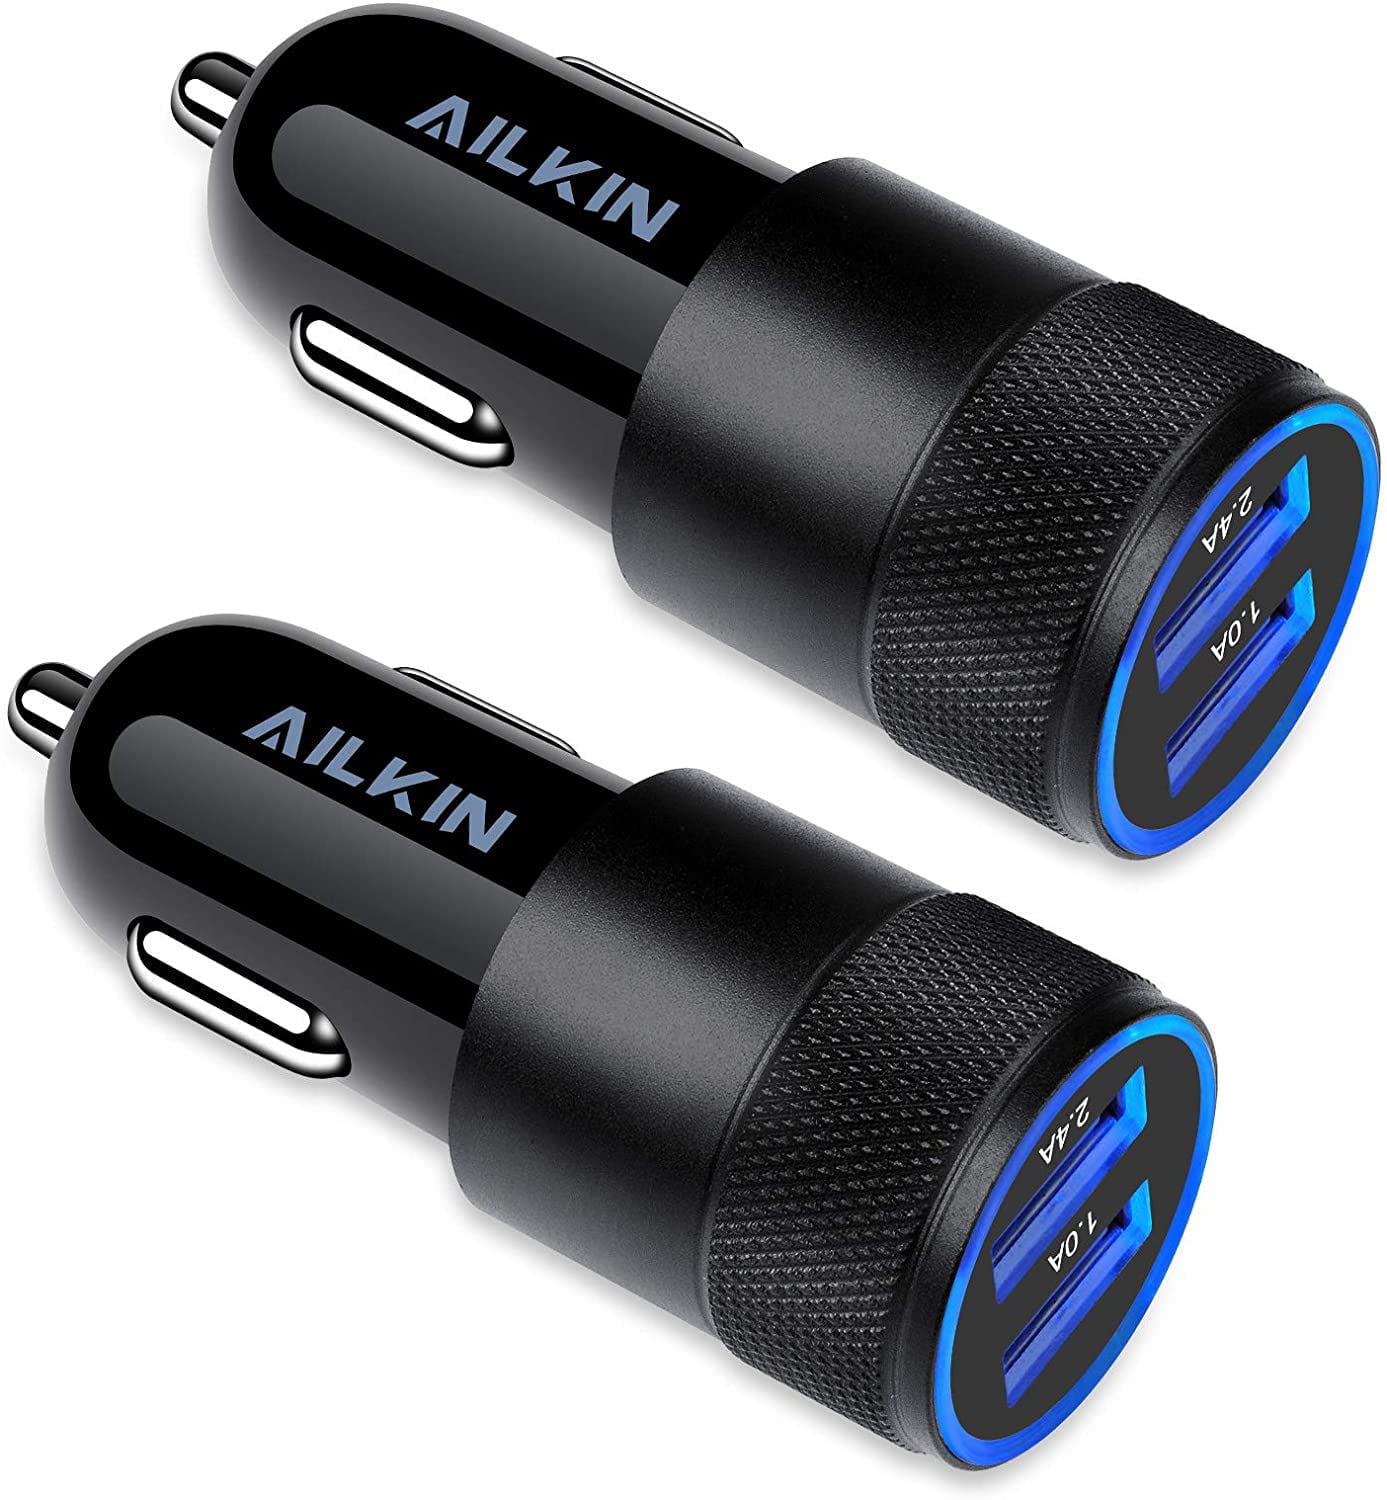 Car Charger,AILKIN 2Pack 3.4A Dual Port USB Car Charger Adaptor for iPhone  Charging Cigarette Lighter Socket Adapter,Black